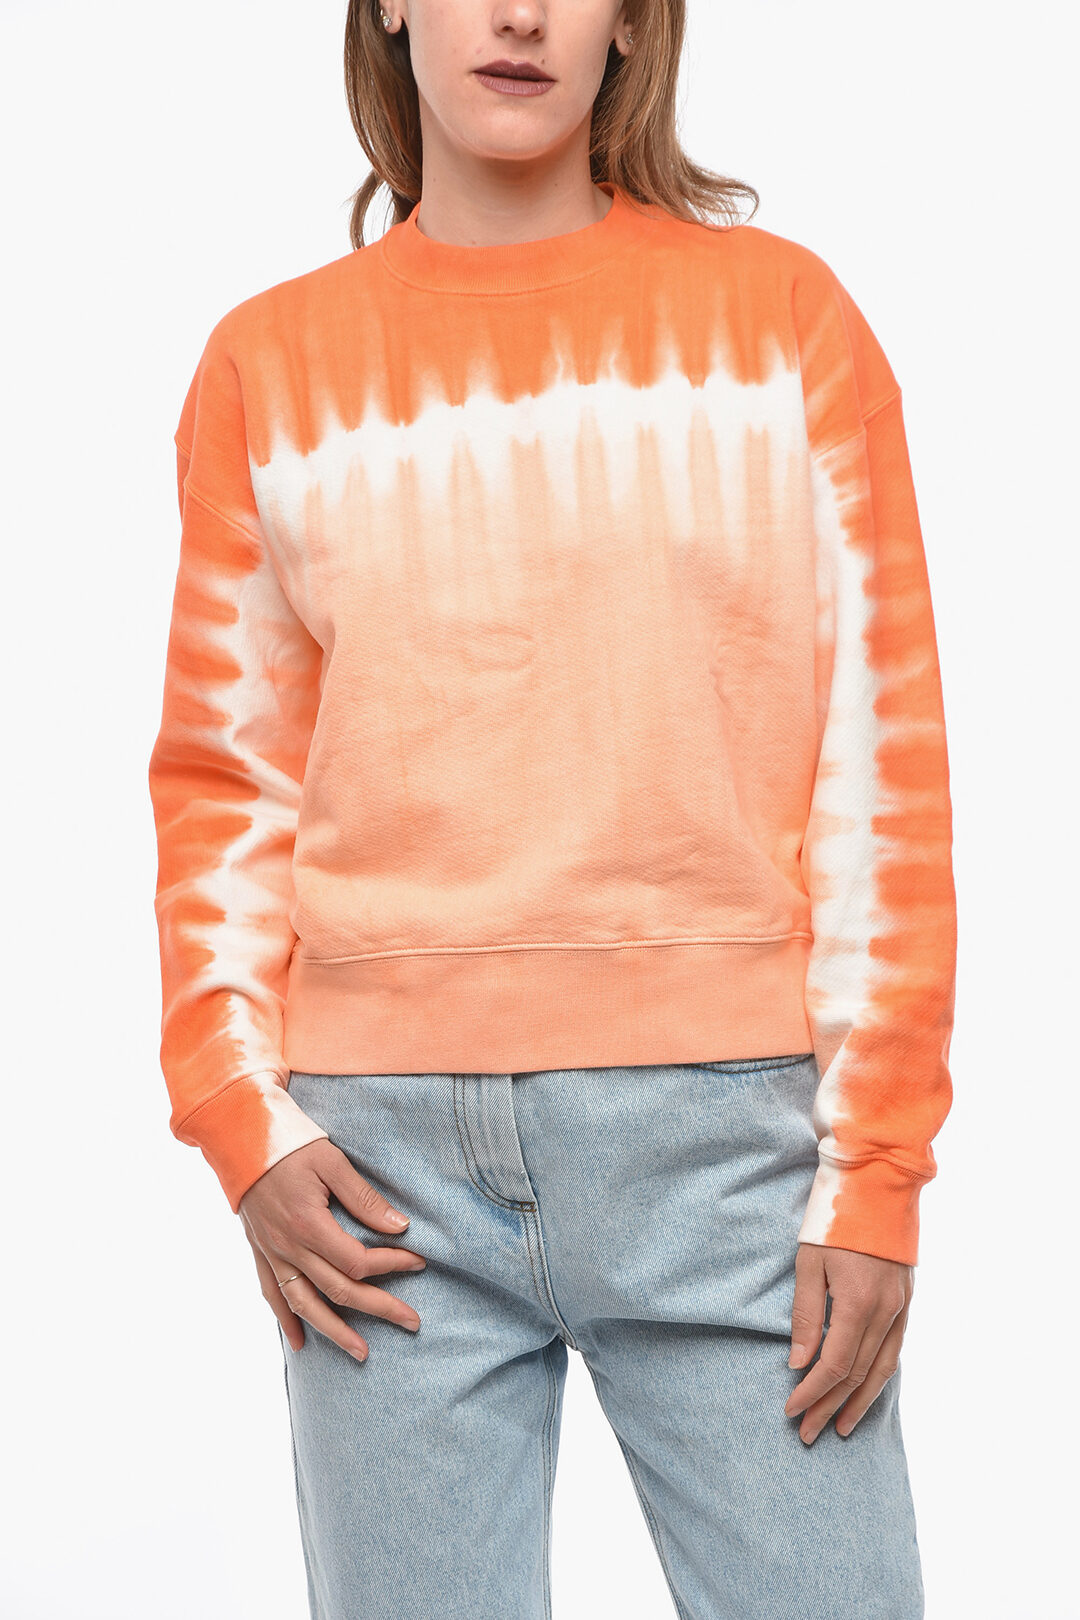 WHITE LABEL Crew-neck Sweatshirt with Tie-dye Effect and Embossed Logo